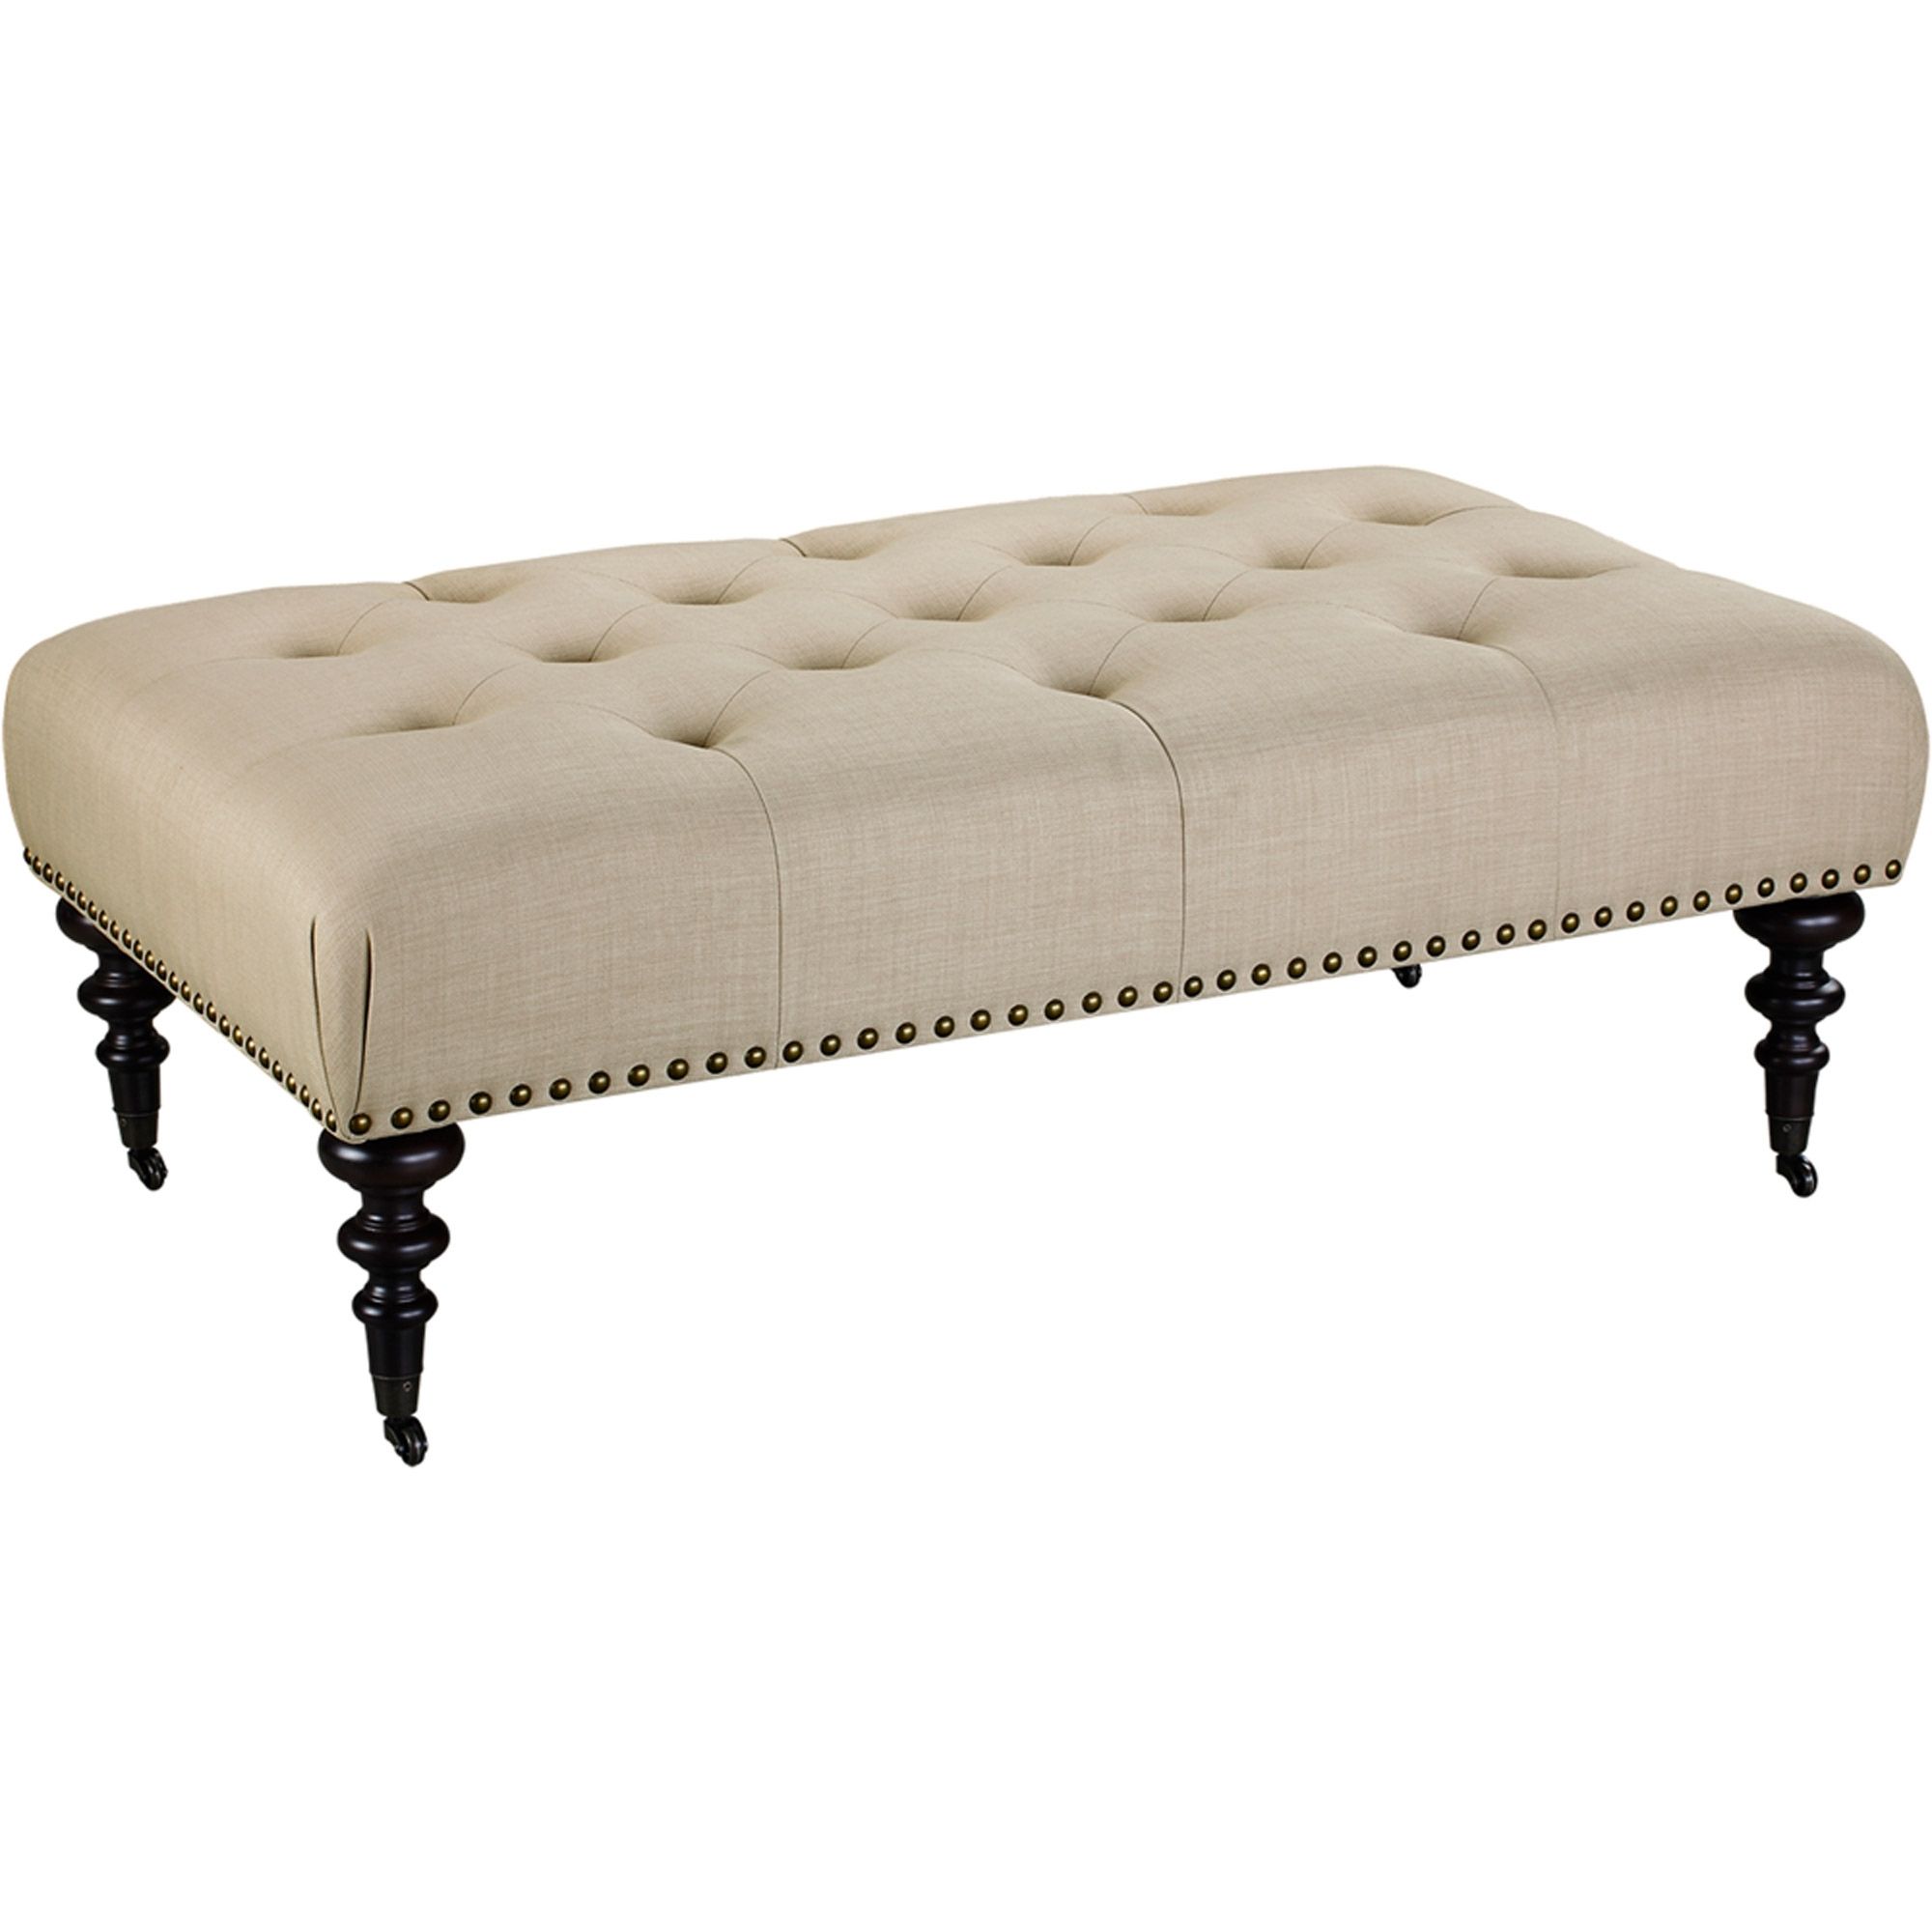 Dorel Living Winston Button Tufted Upholstered Ottoman, Beige Throughout Ottomans With Wheels (View 8 of 15)